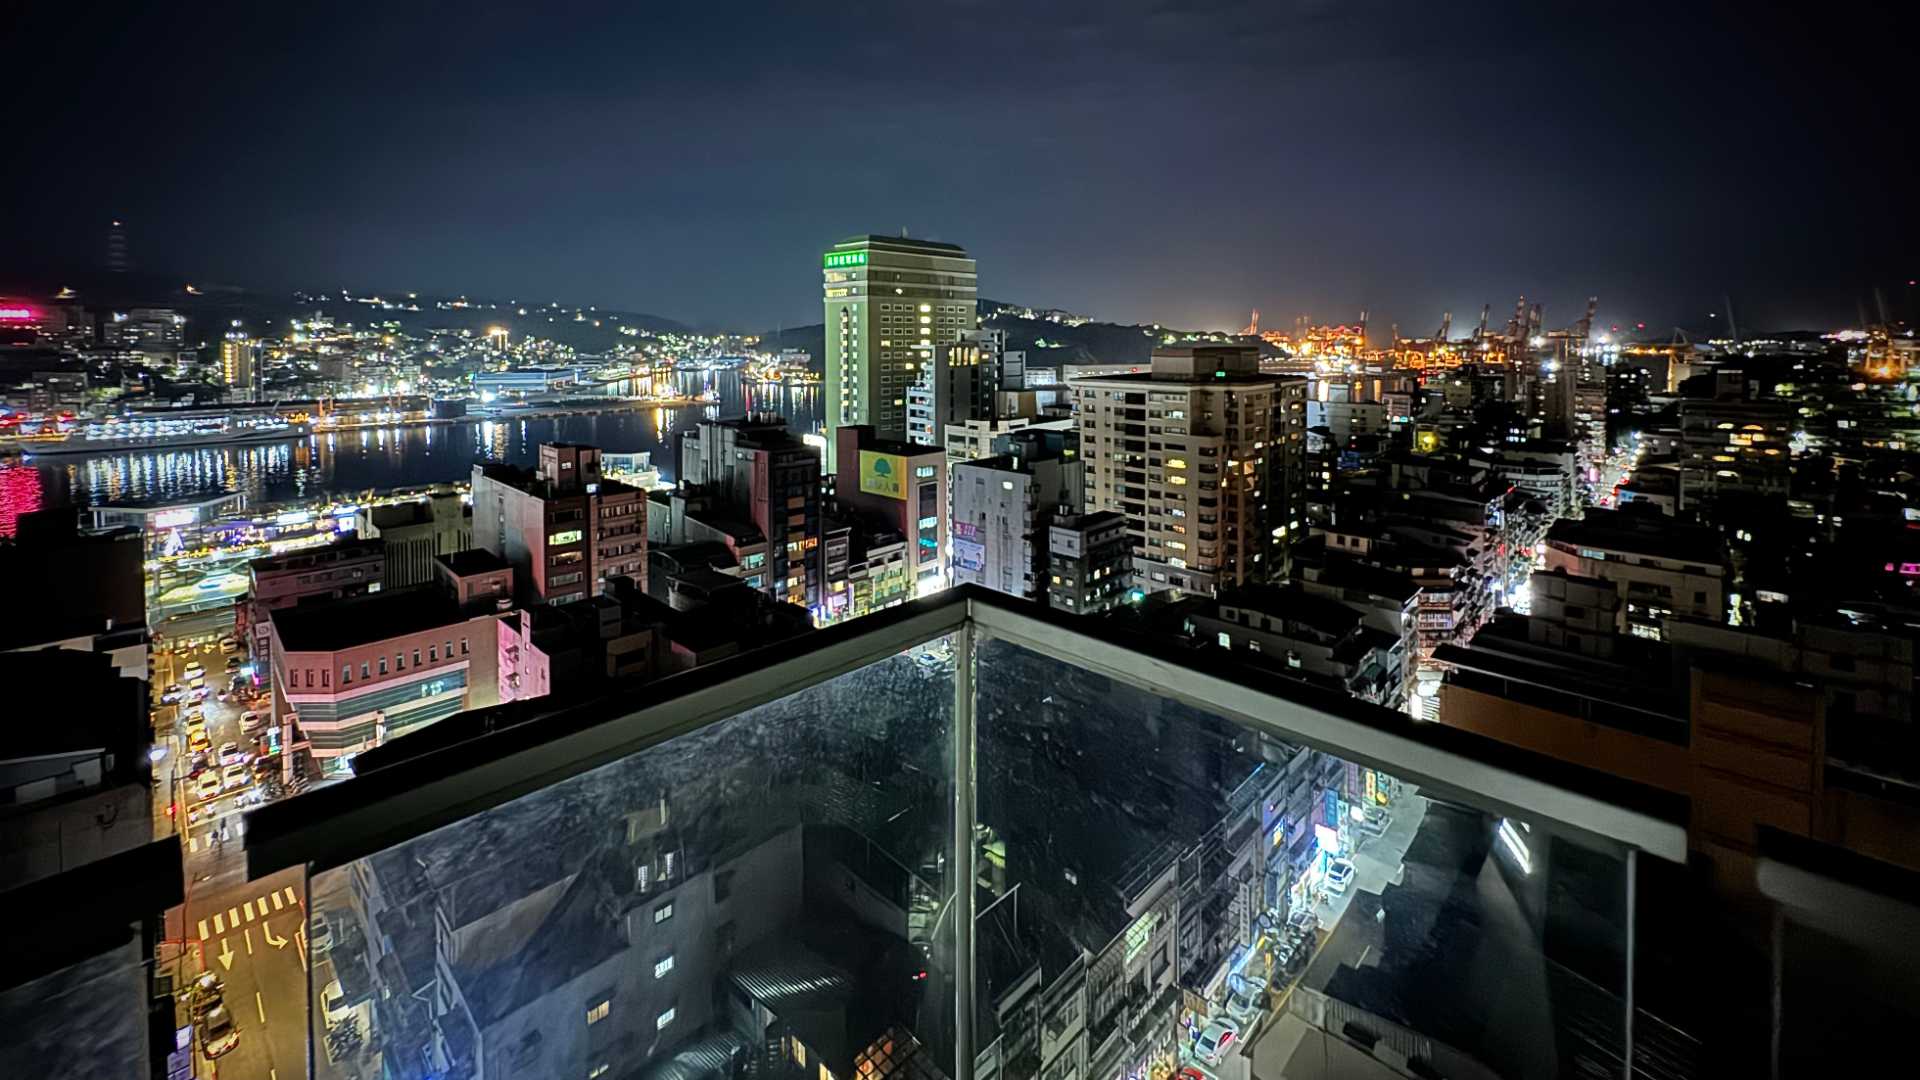 Panoramic view of Keelung City at night. A glass balustrade is visible in the foreground.